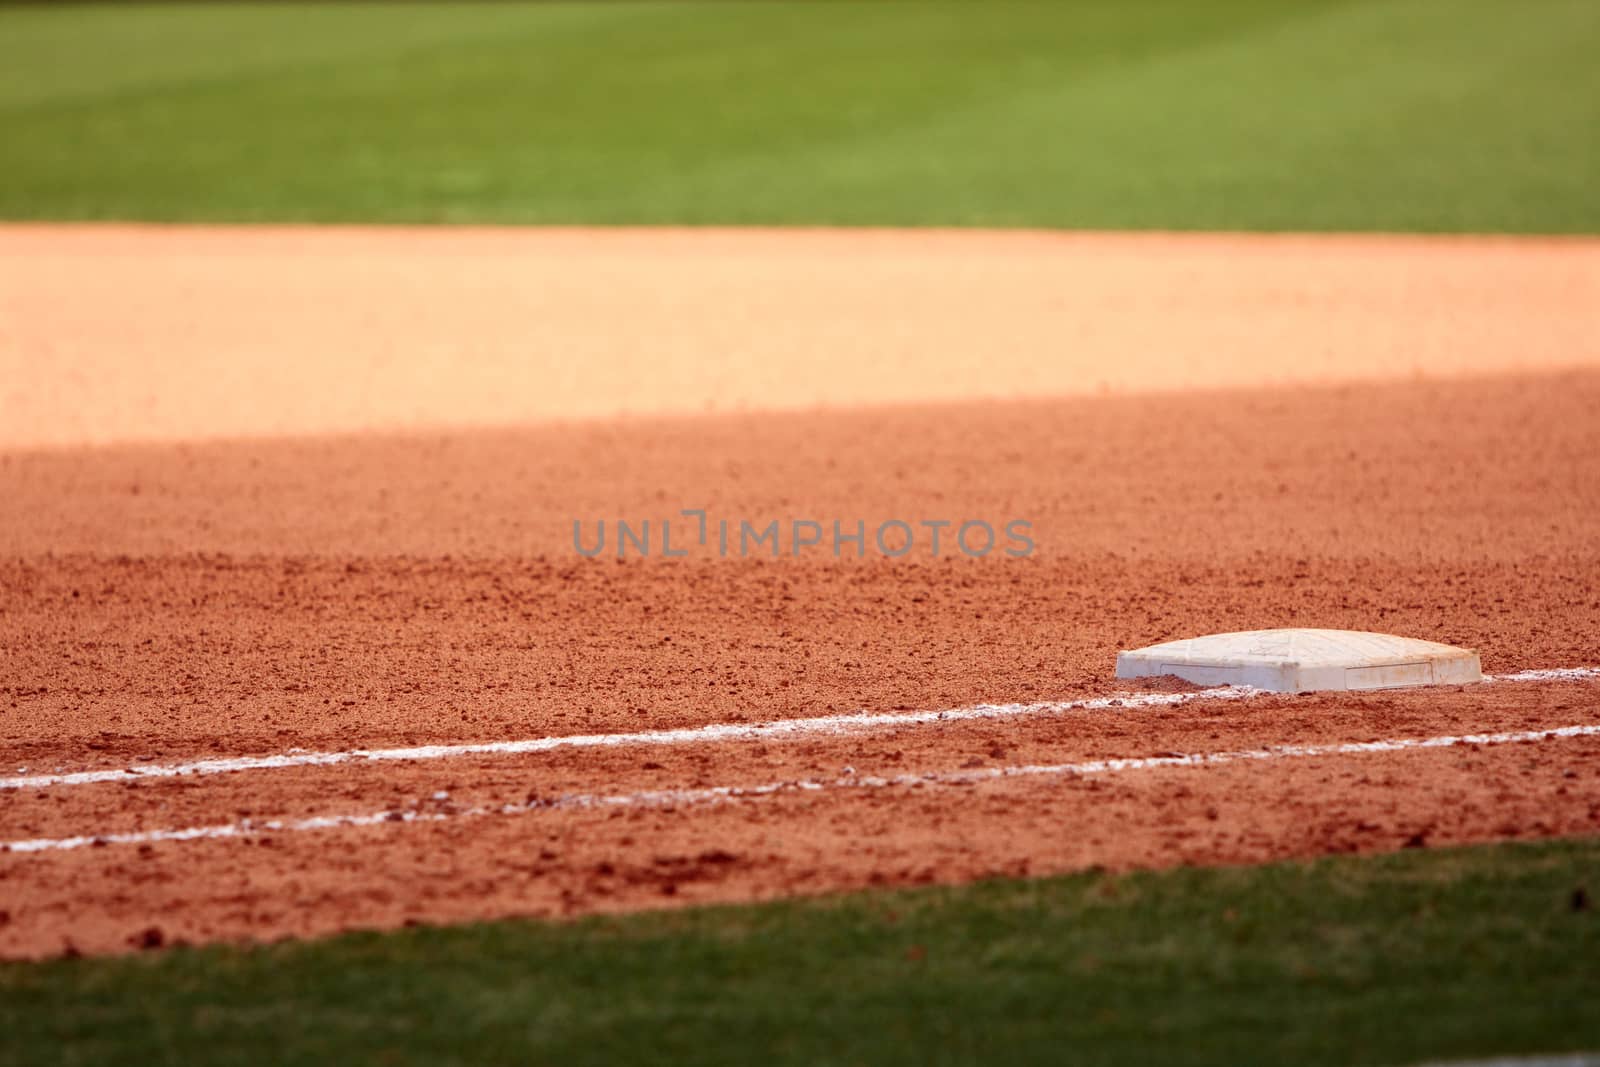 First base is featured in empty baseball field, showing infield dirt and outfield grass.